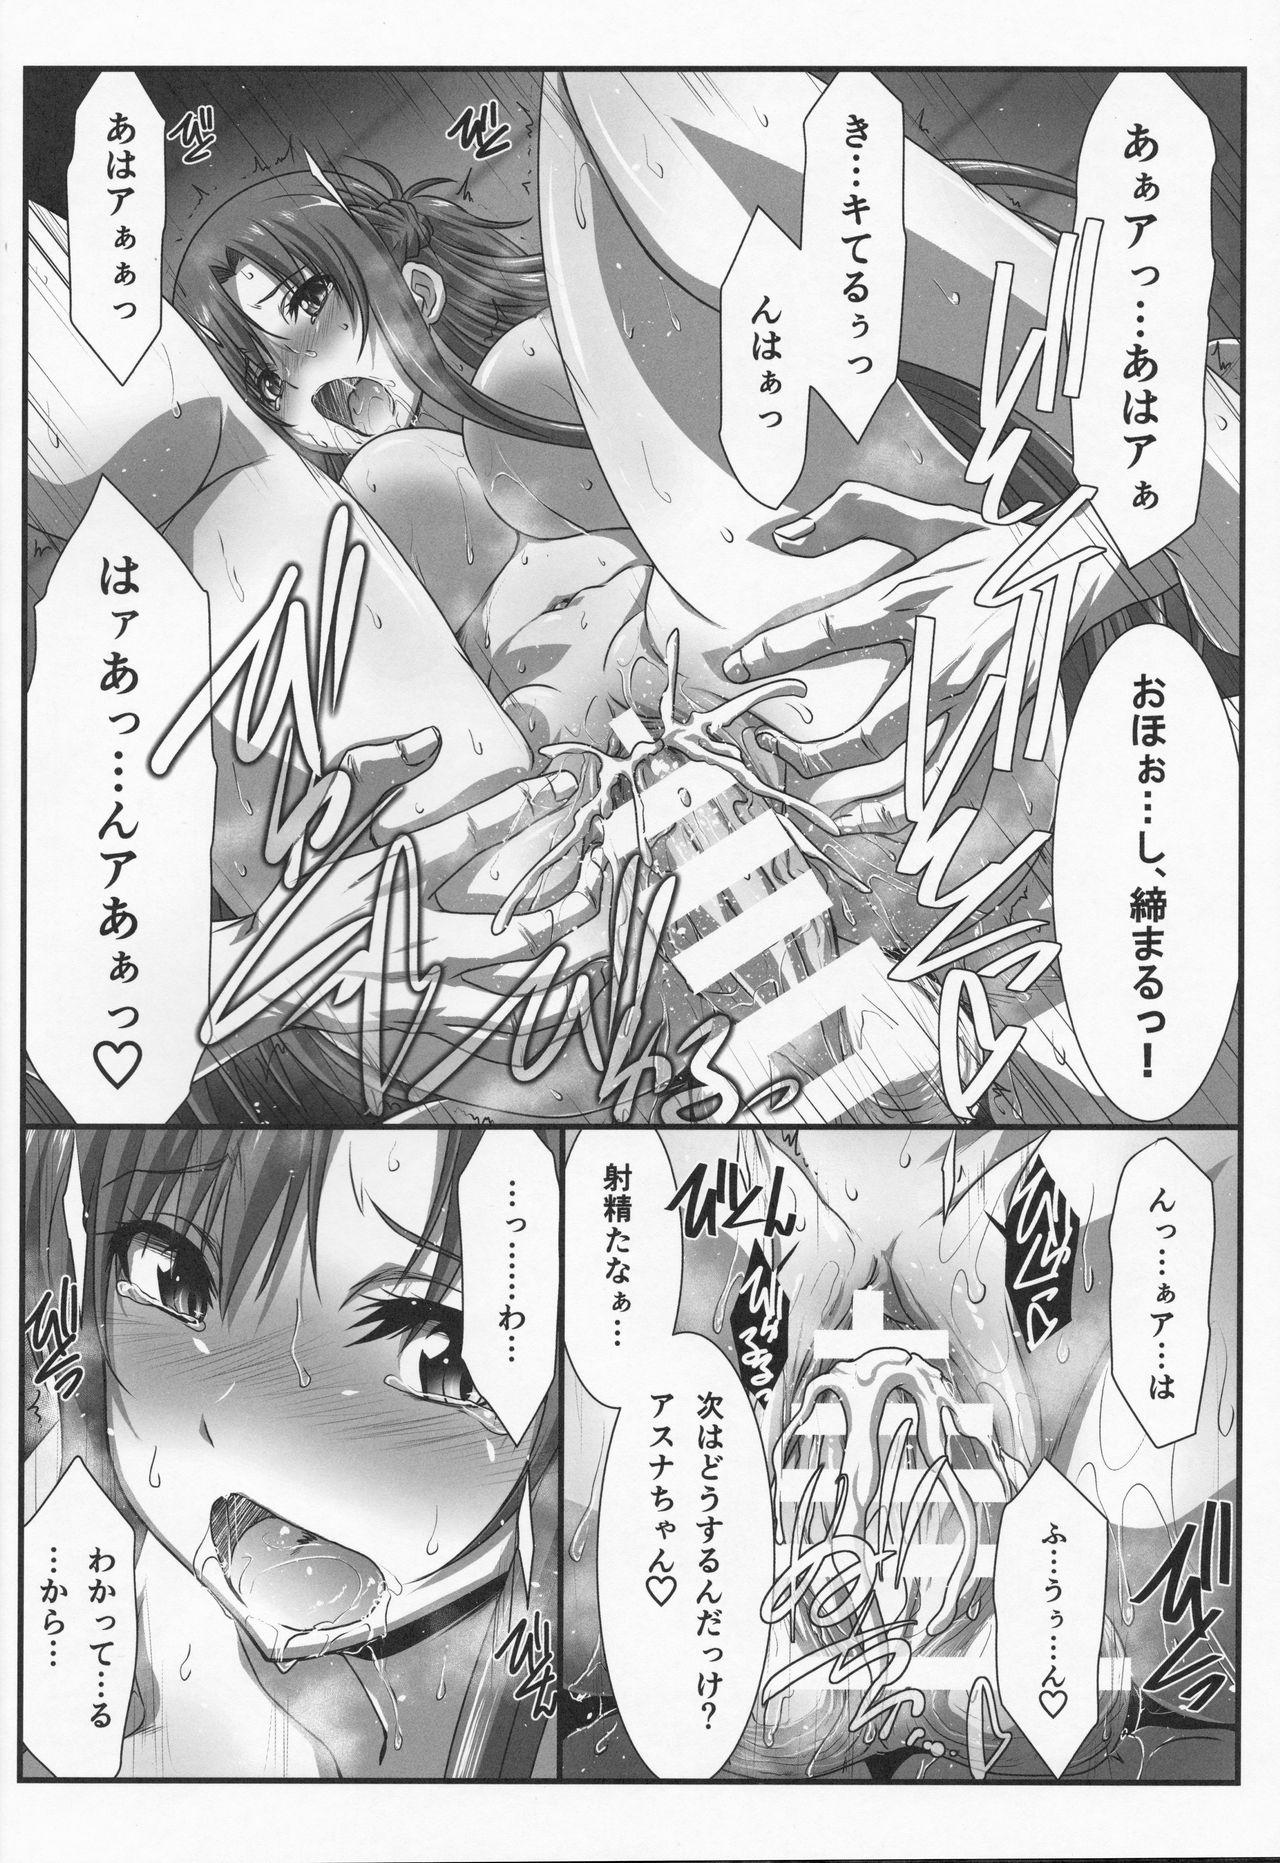 Funny Astral Bout Ver. 42 - Sword art online Interracial Sex - Page 11